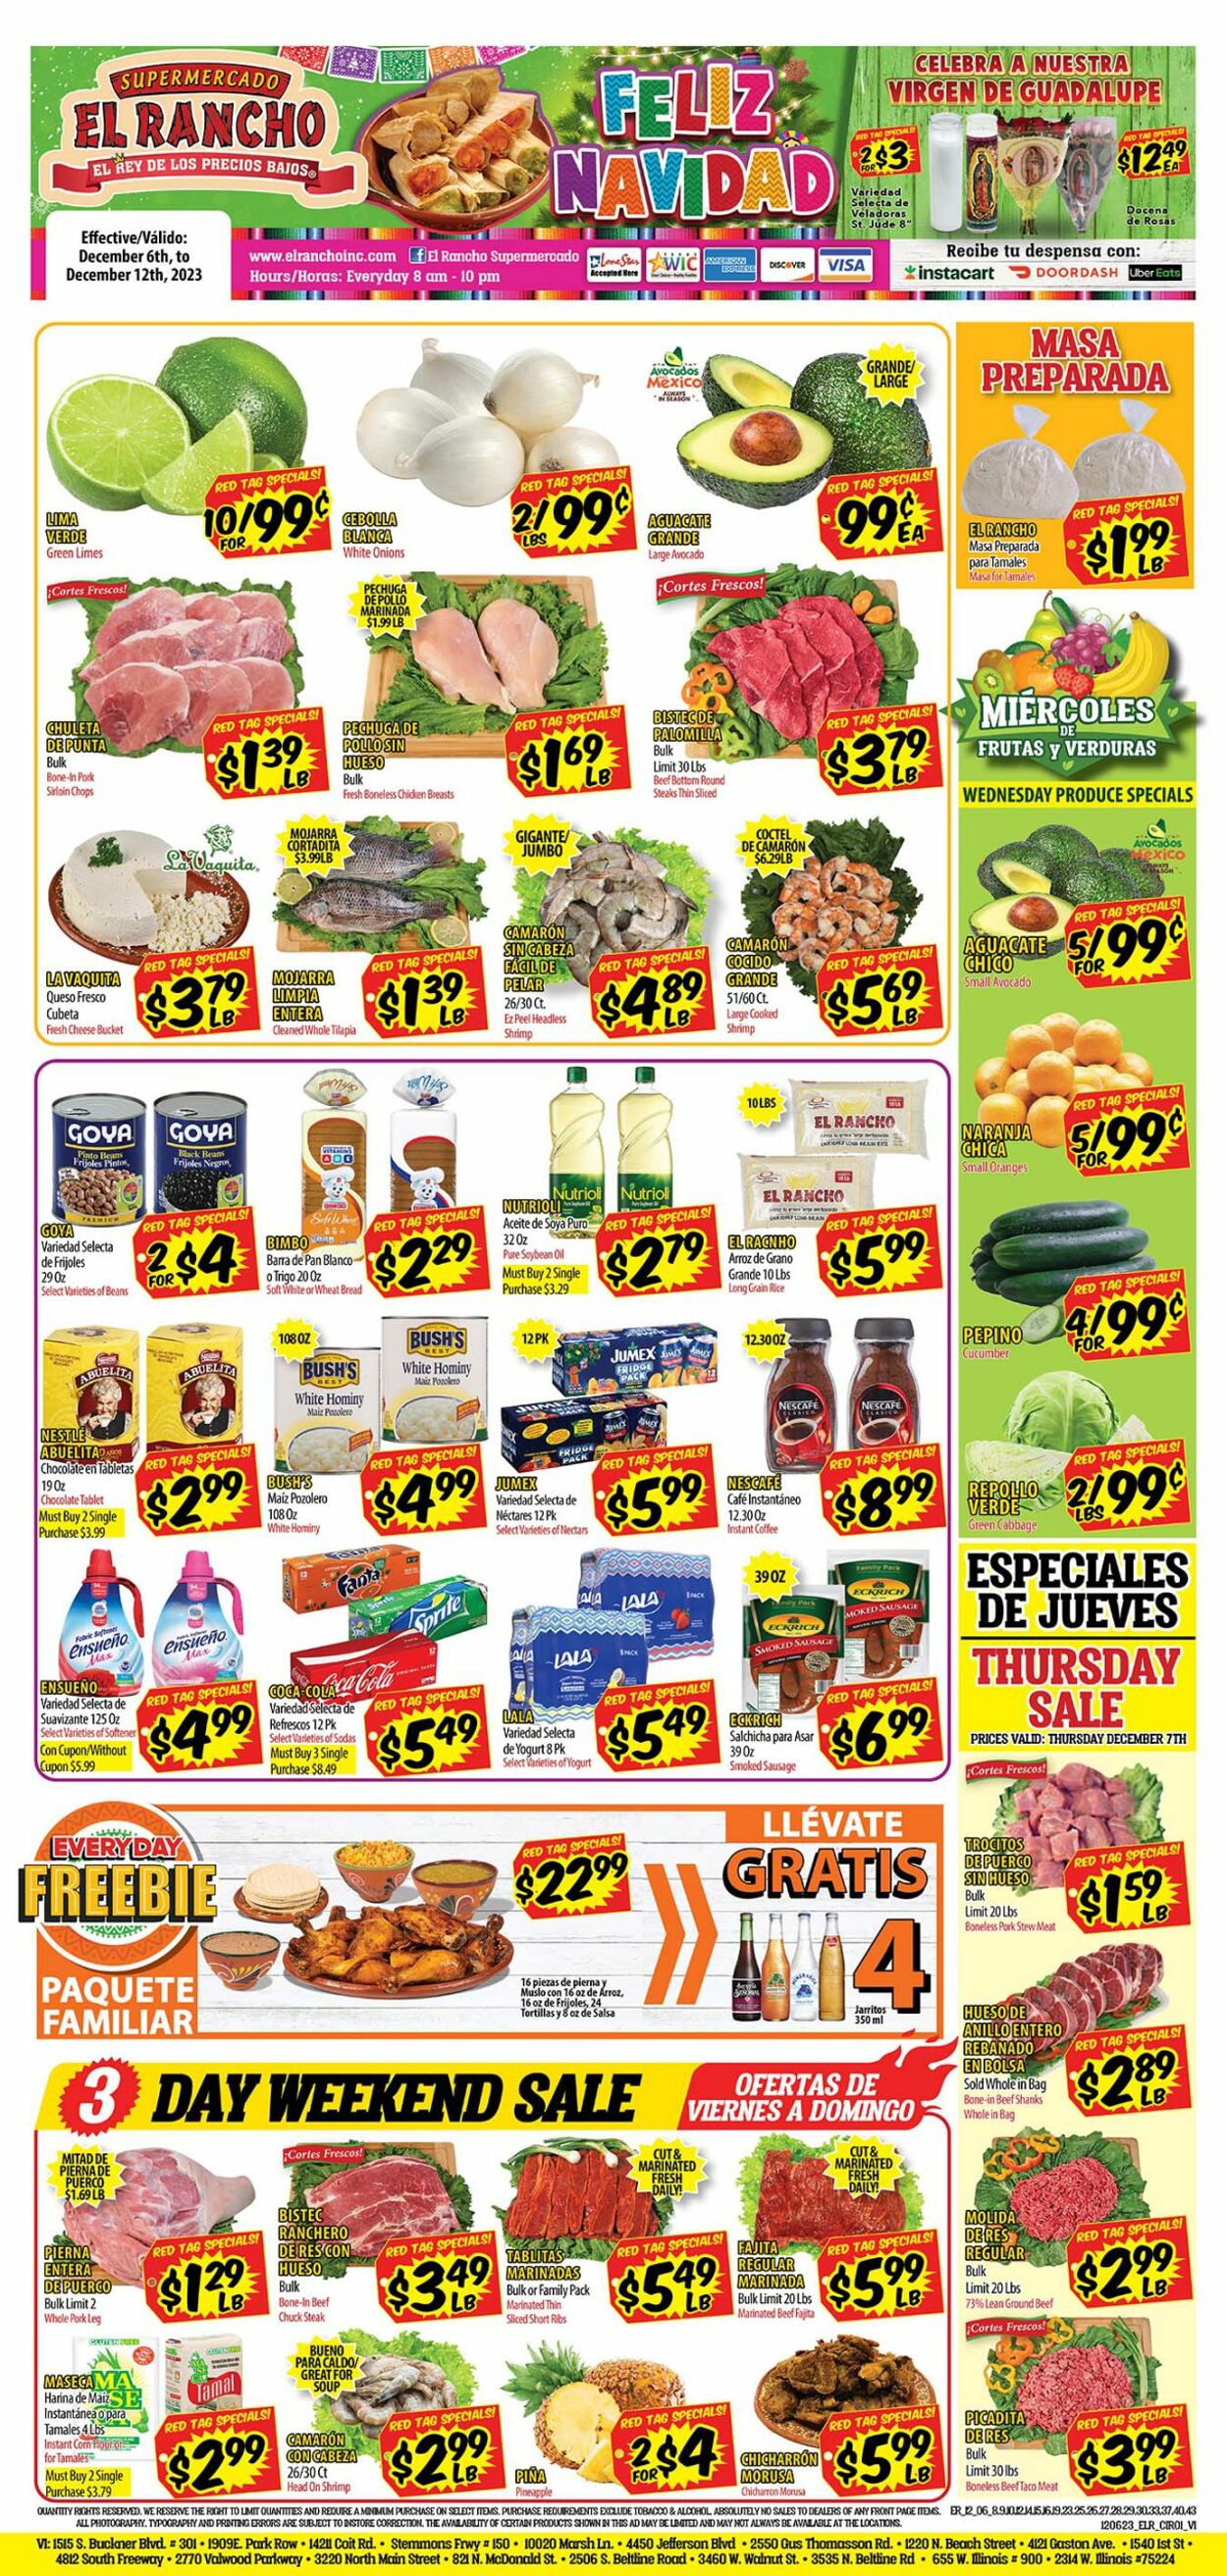 El Rancho Promotional Ad - Valid from 12/06 to 12/12 - Page nb 1 ...